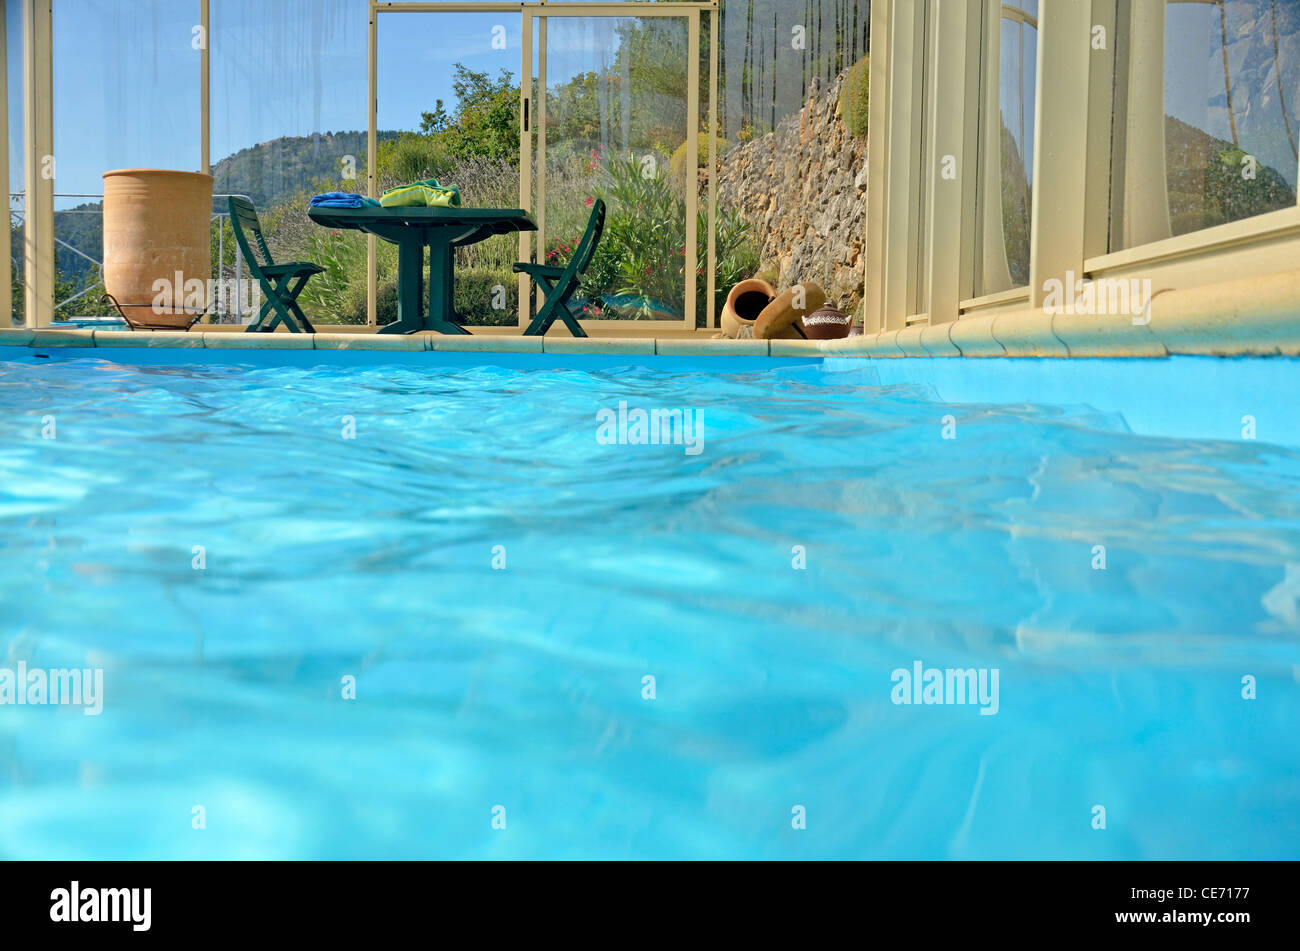 Luxury indoor swimming pool in the mountains in the summer holiday season Stock Photo